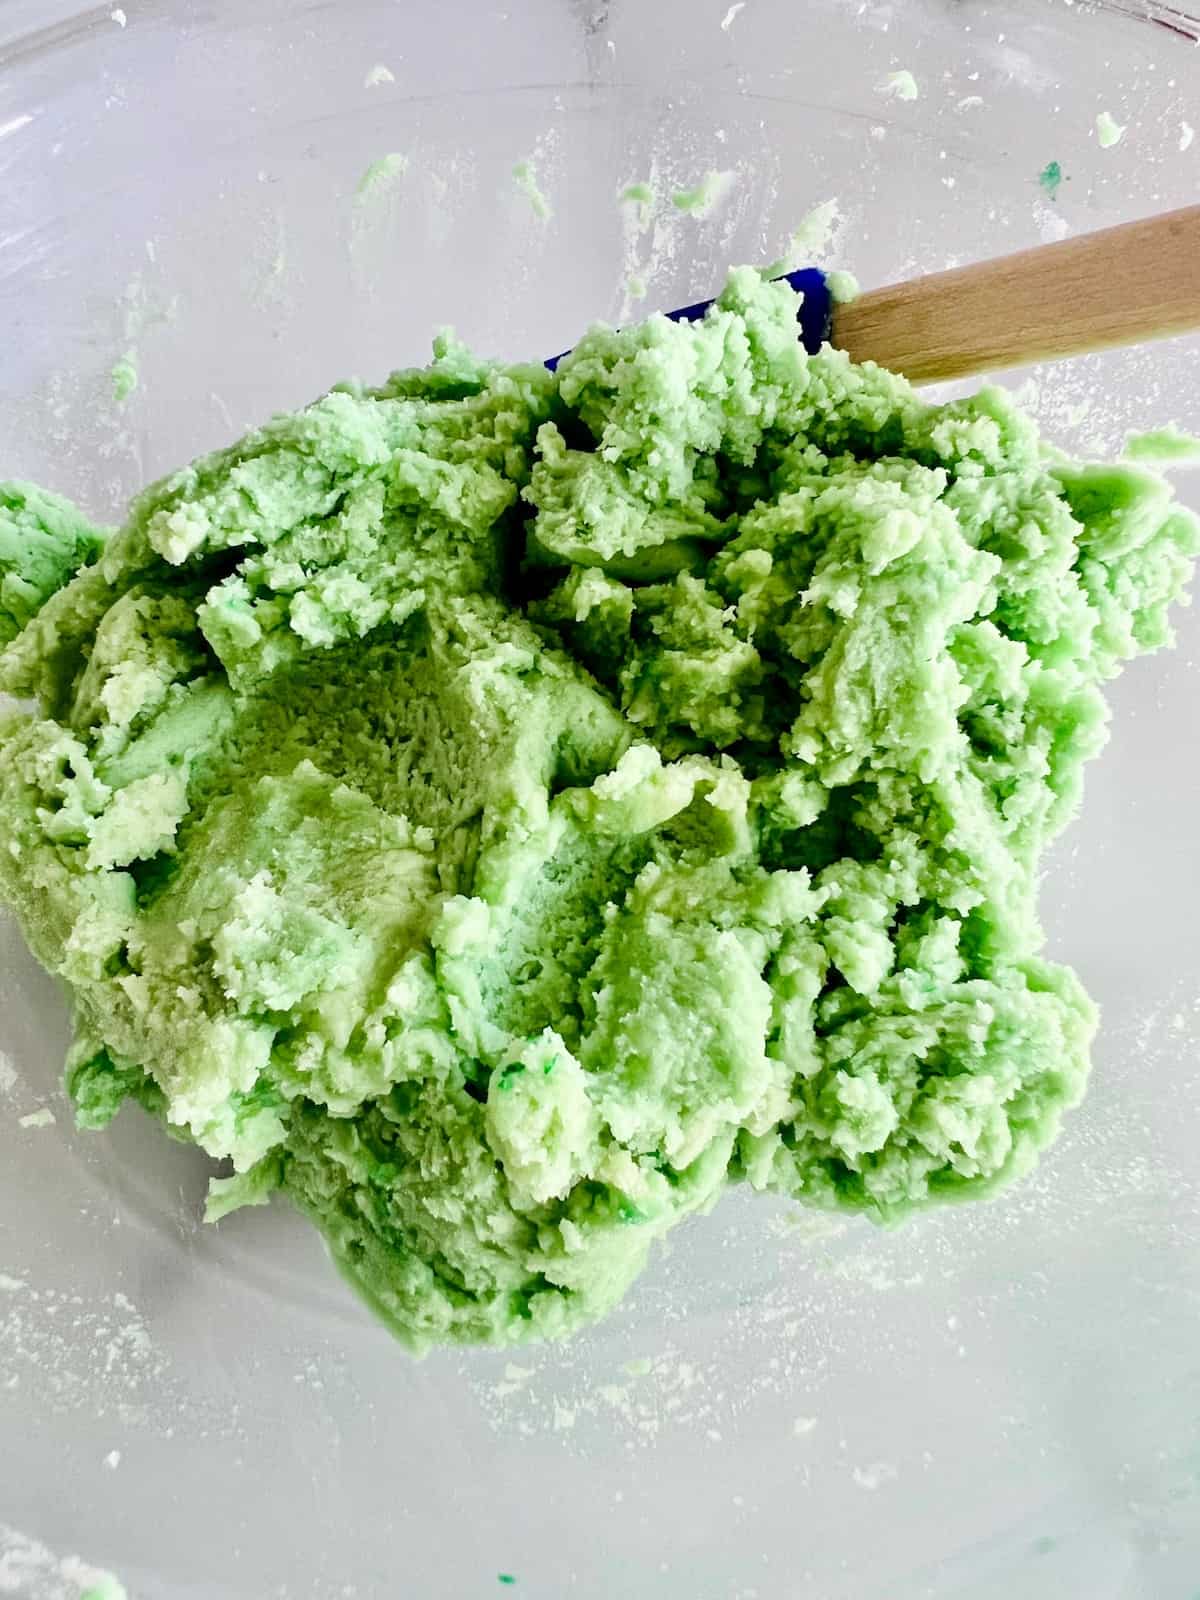 Light green colored cookie dough.